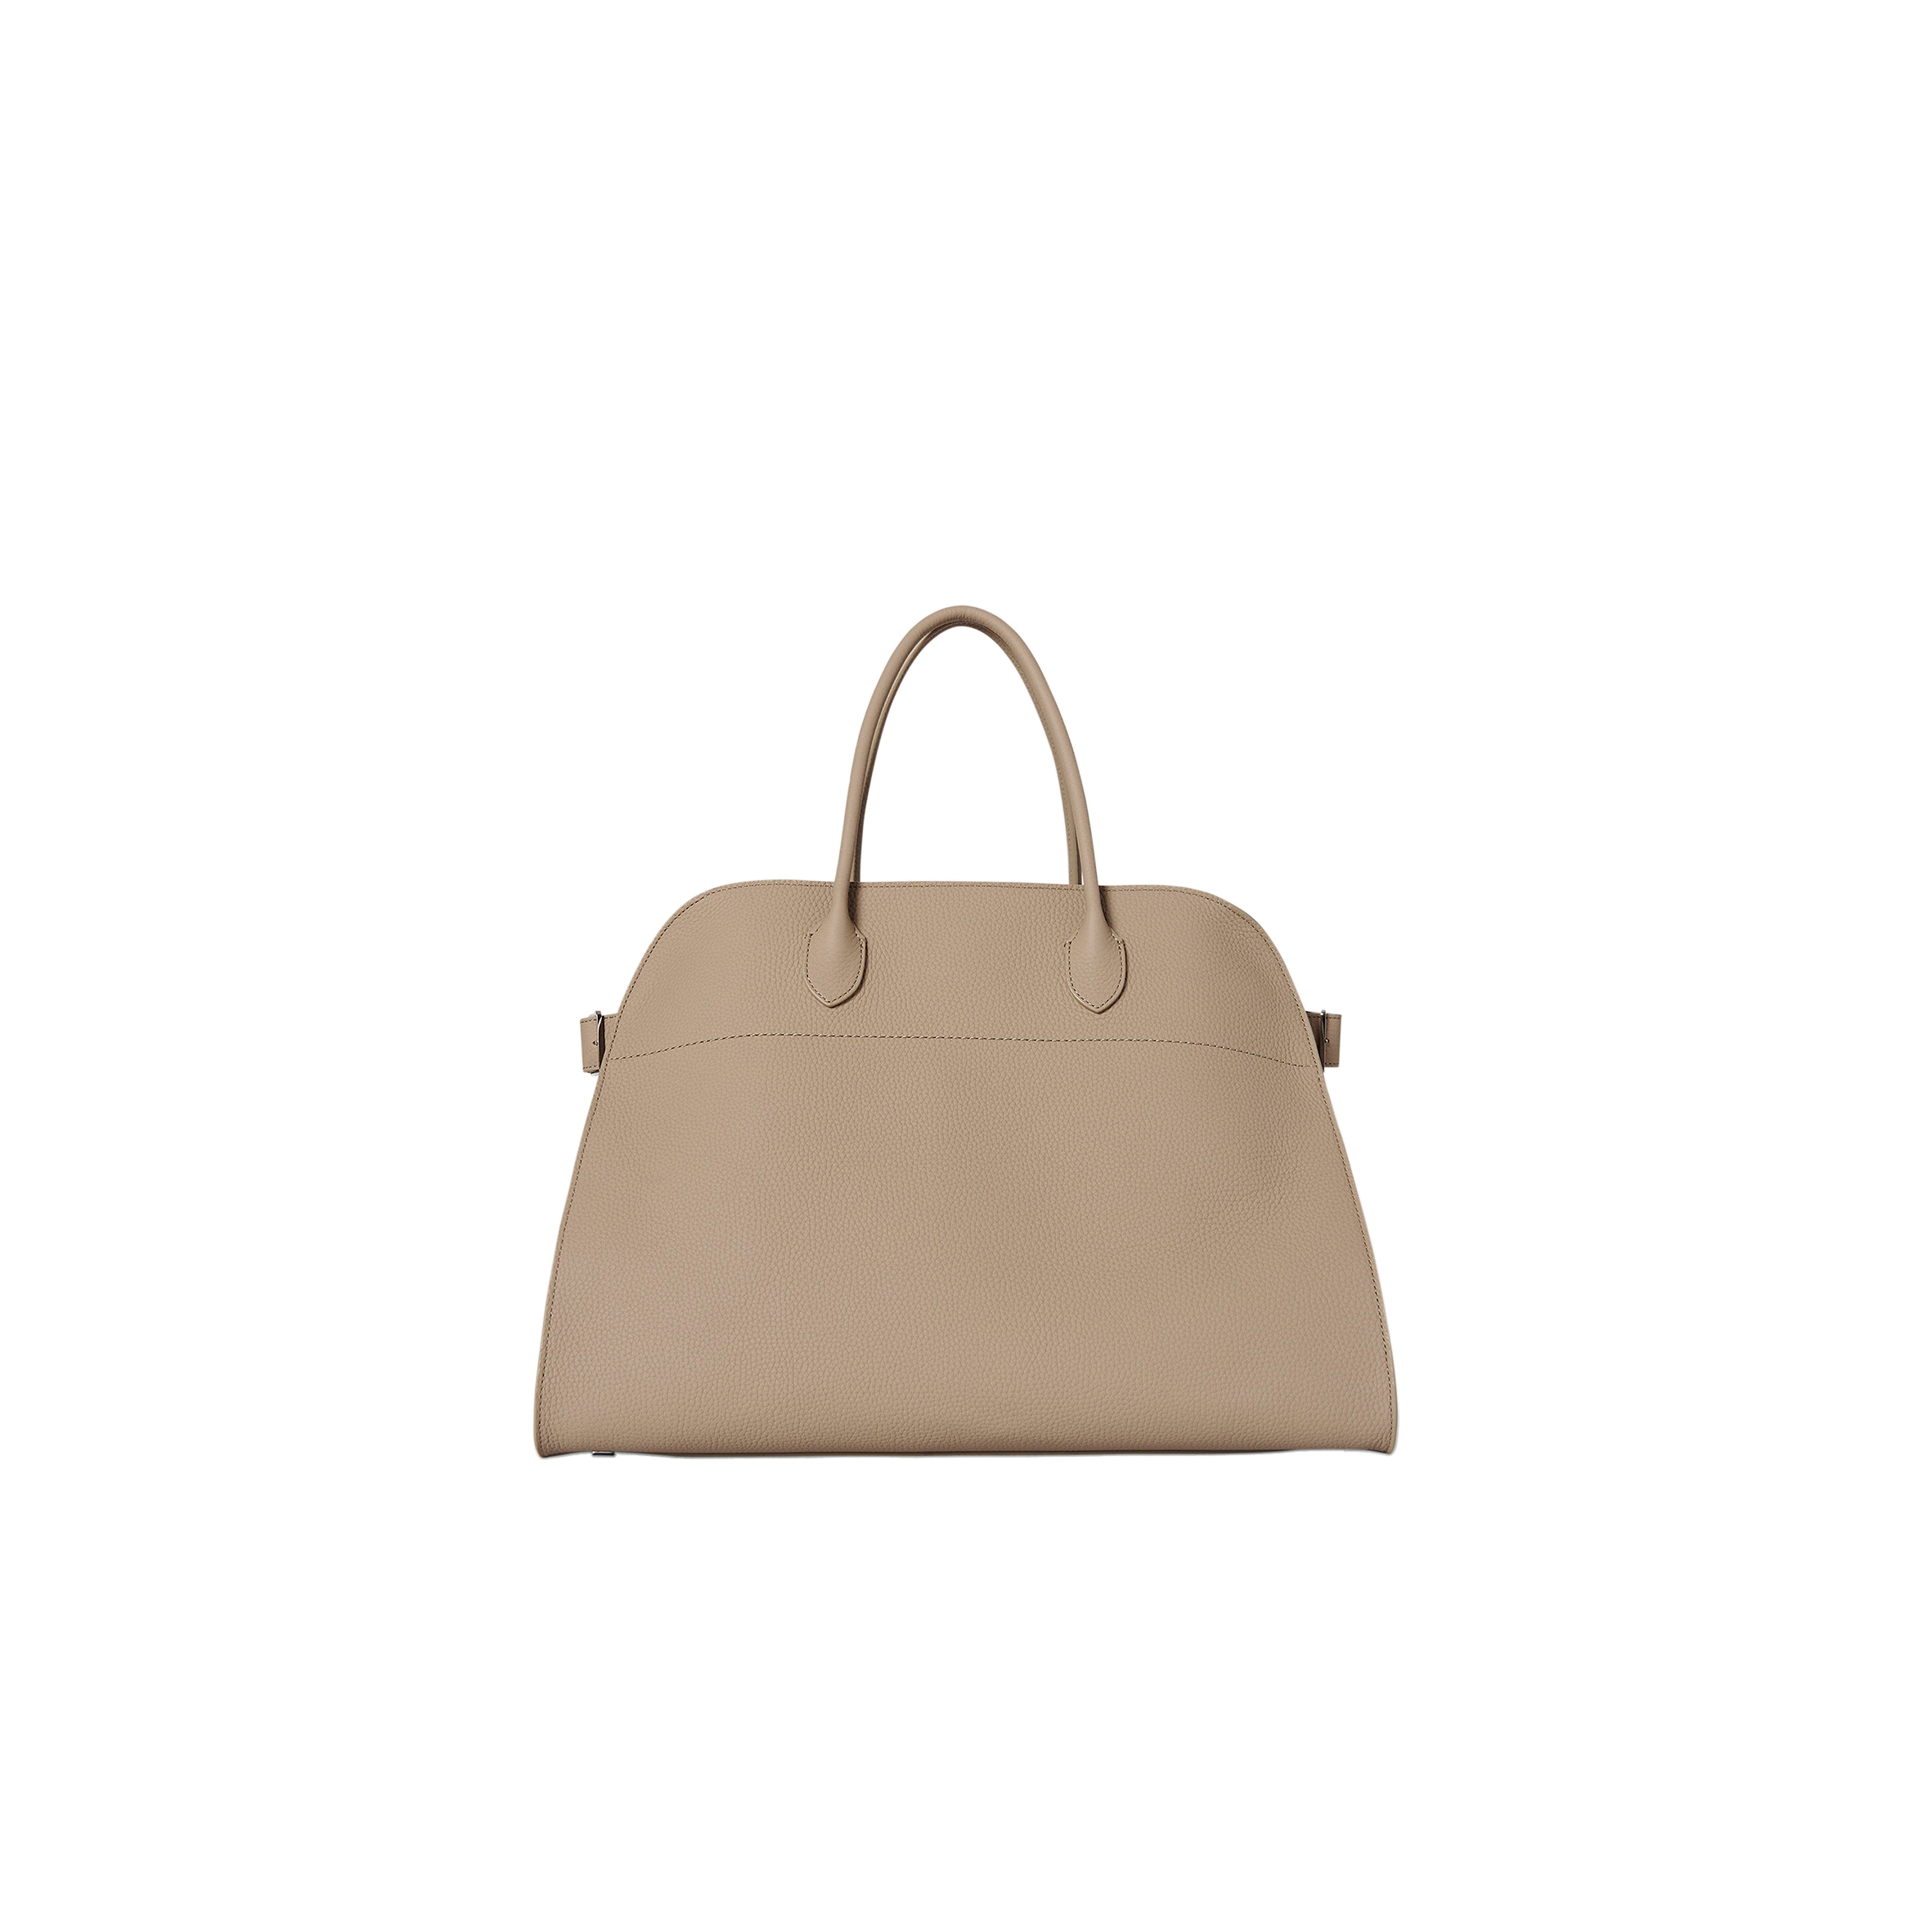 THE ROW SOFT MARGAUX 17 BAG IN LEATHER DARK TAUPE W1254L133DTPL (43*30*25cm)